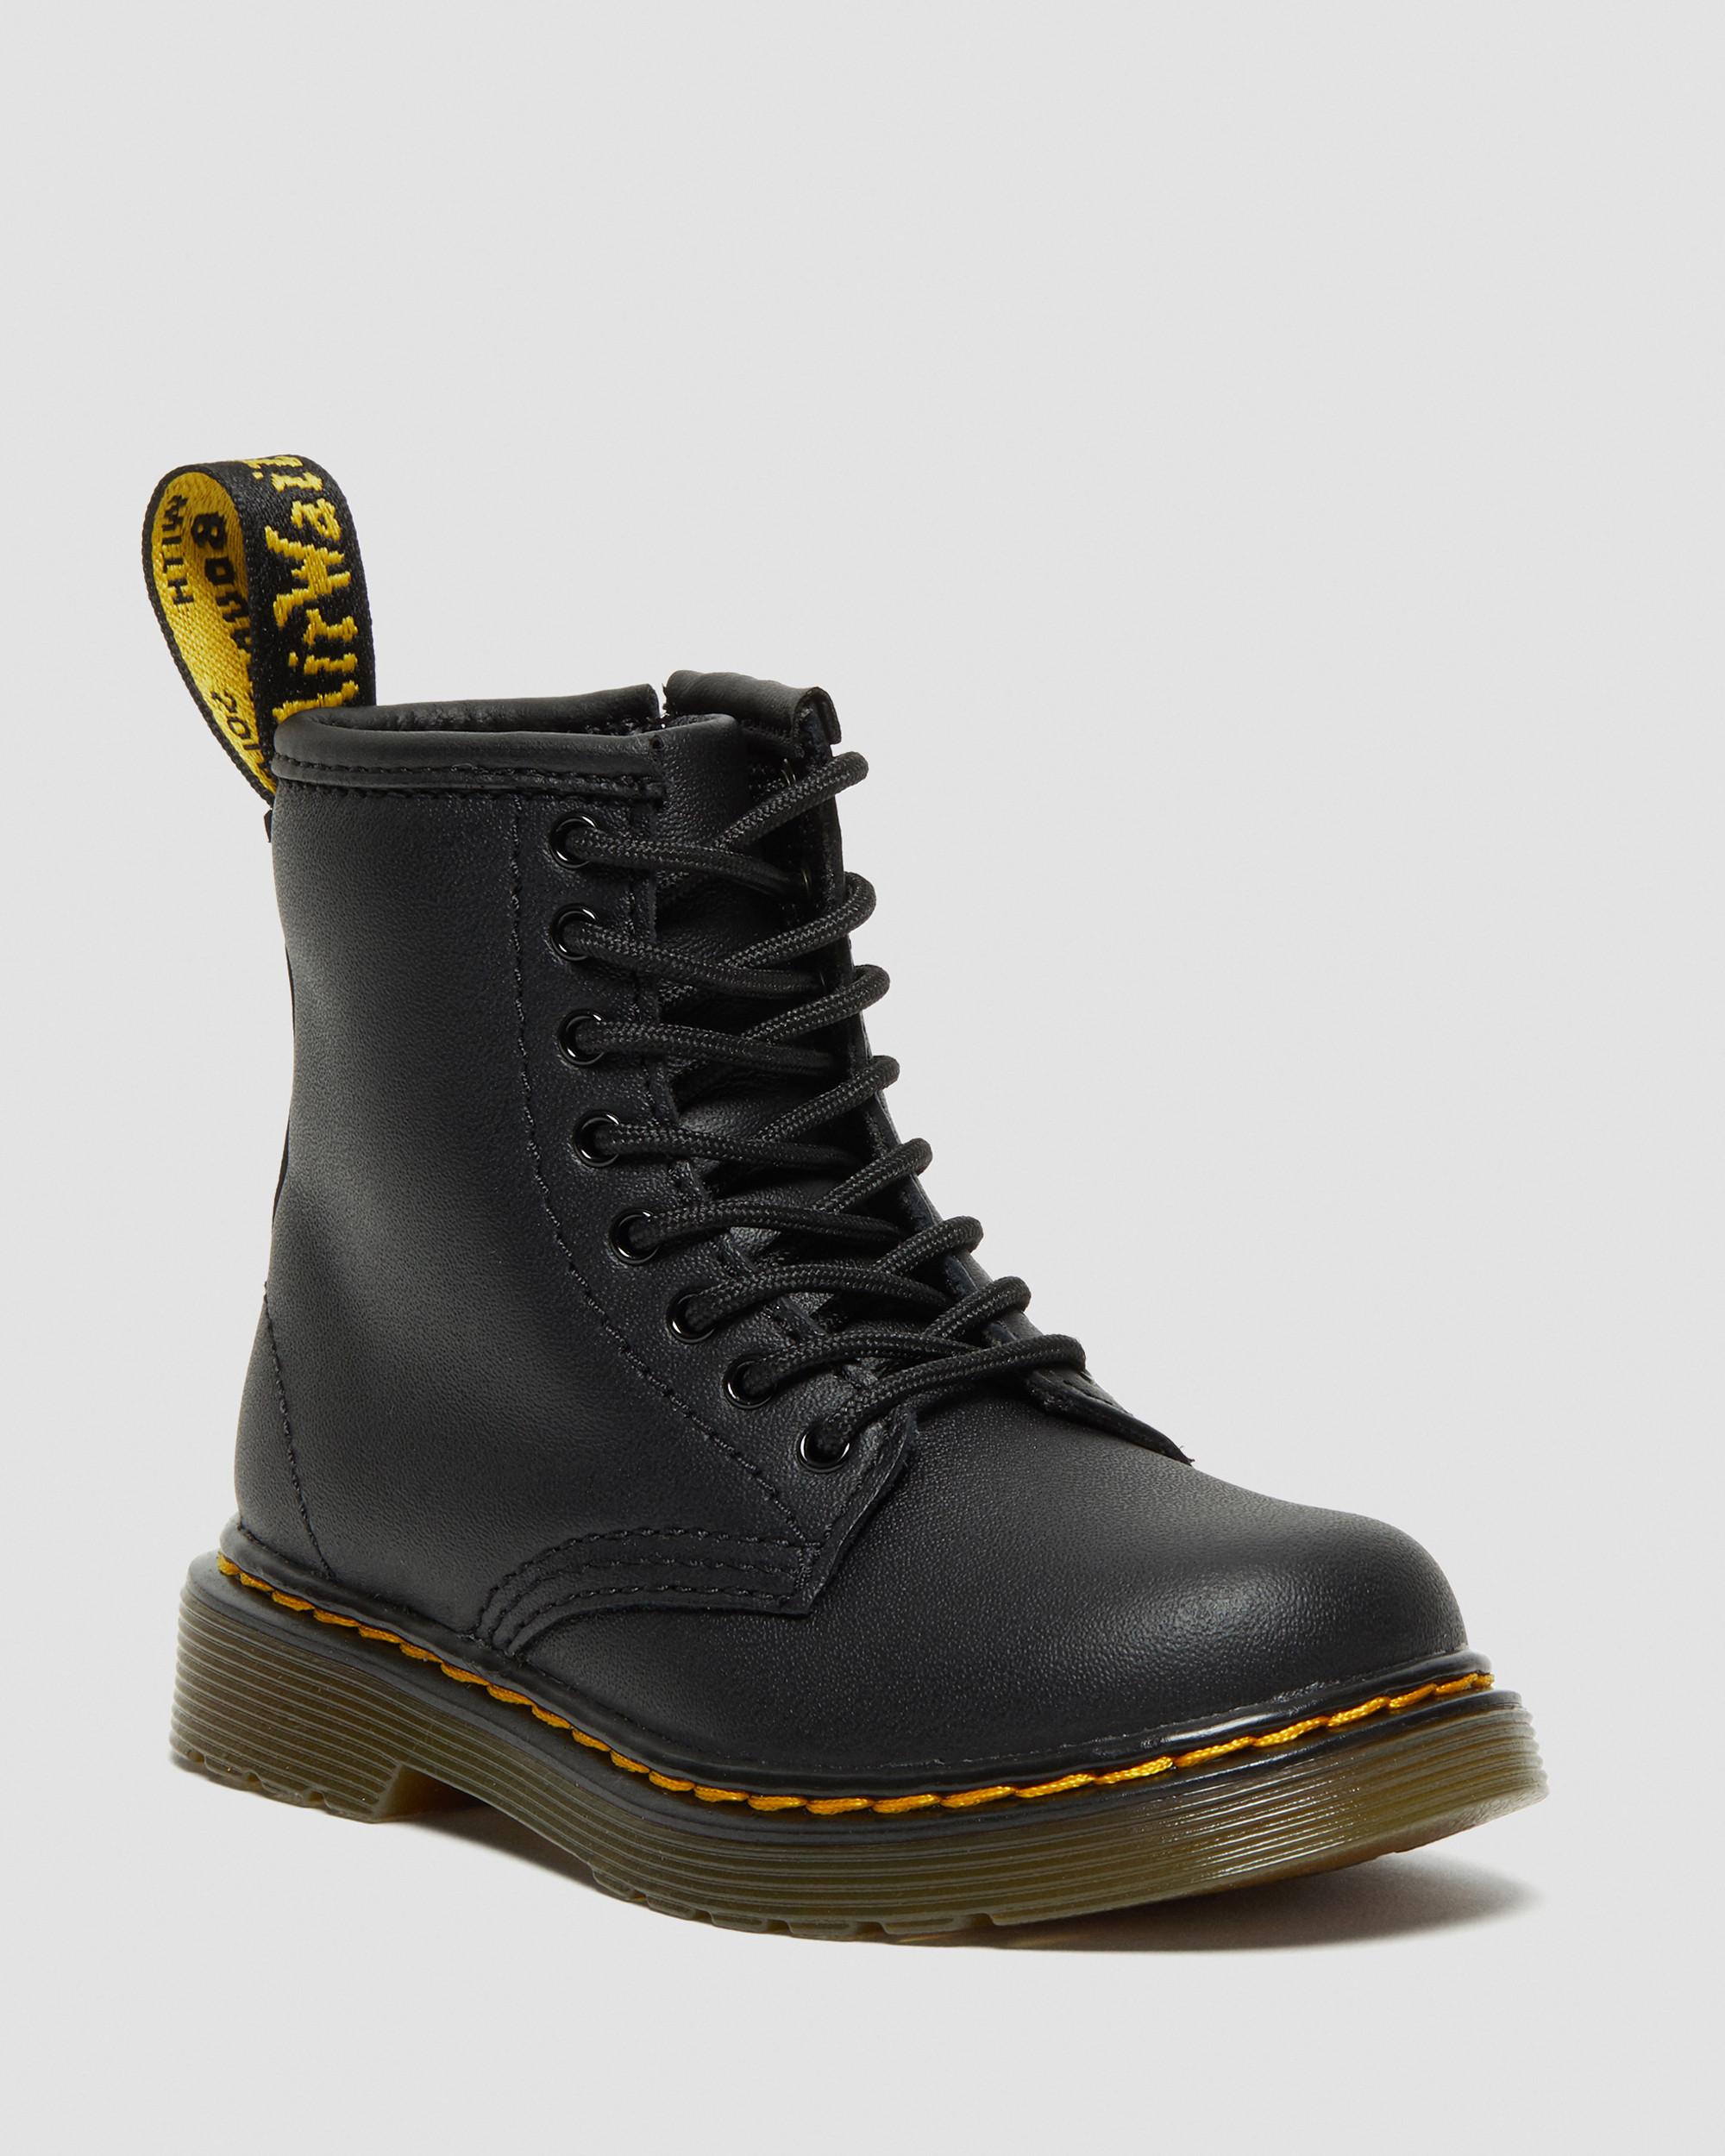 Toddler 1460 Softy T Leather Lace Up BootsToddler 1460 Softy T Leather Lace Up Boots Dr. Martens